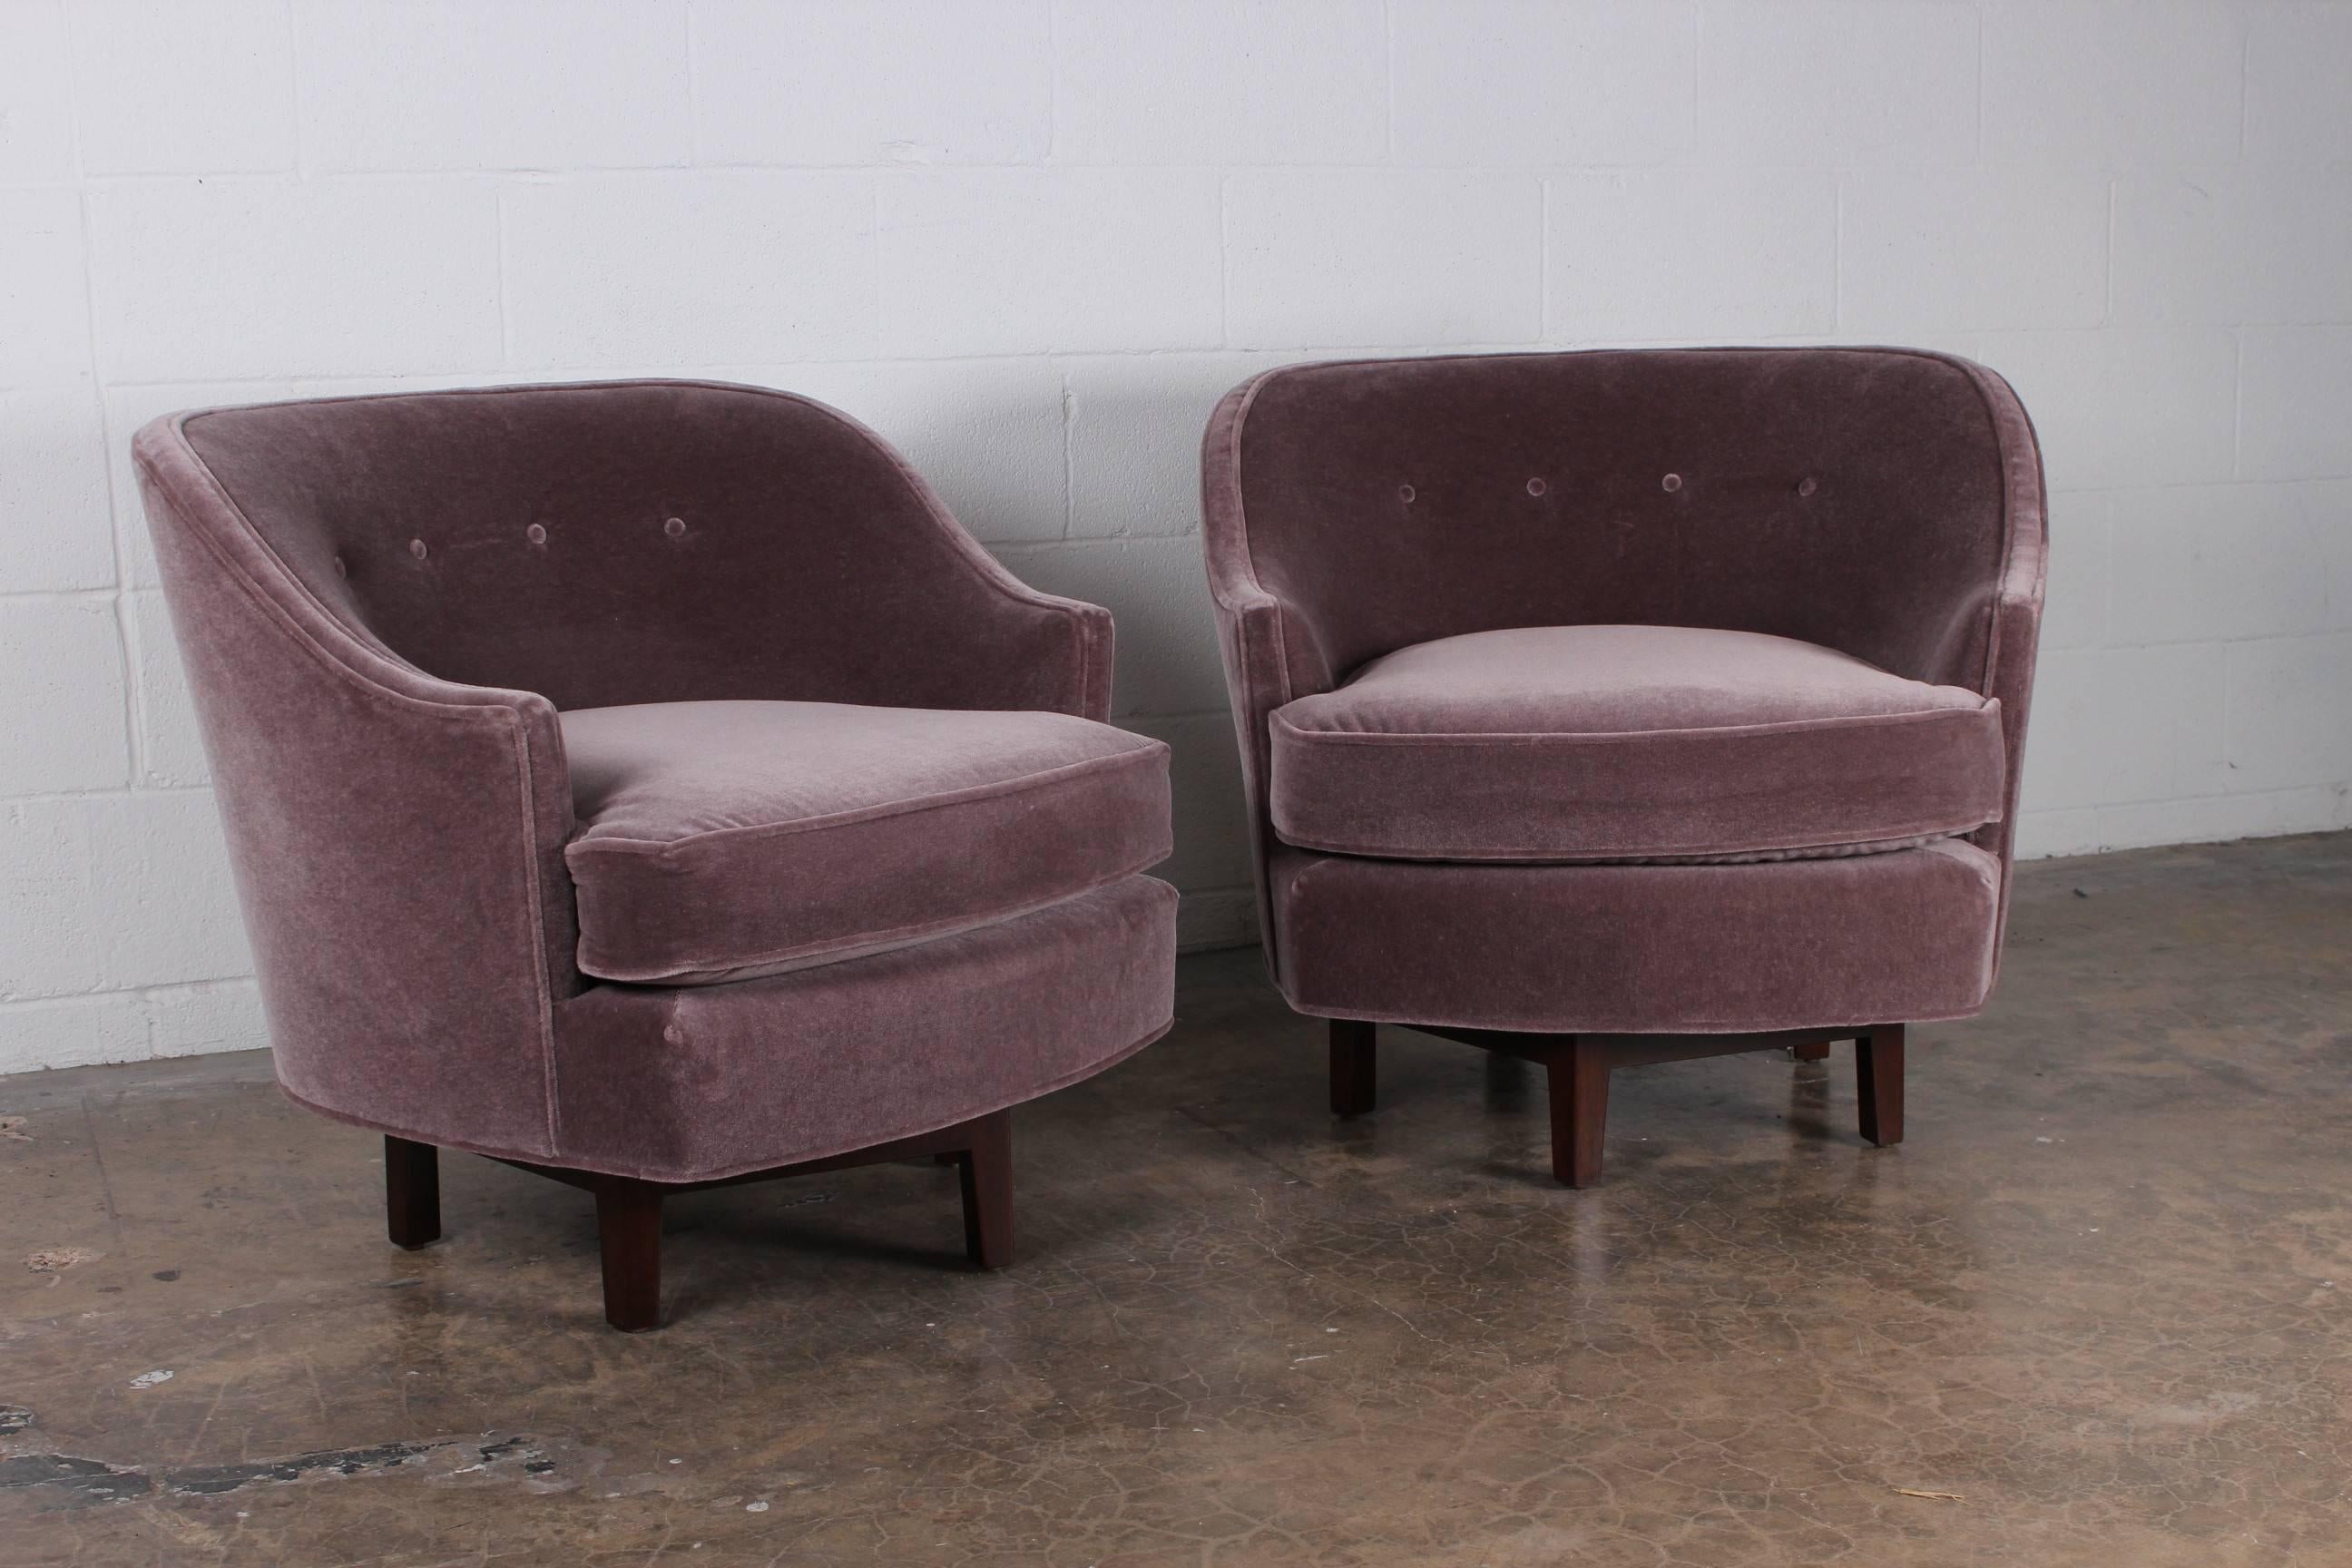 An elegant pair of swivel chairs on sculpted mahogany bases. Newly upholstered in mohair. Designed by Edward Wormley for Dunbar.